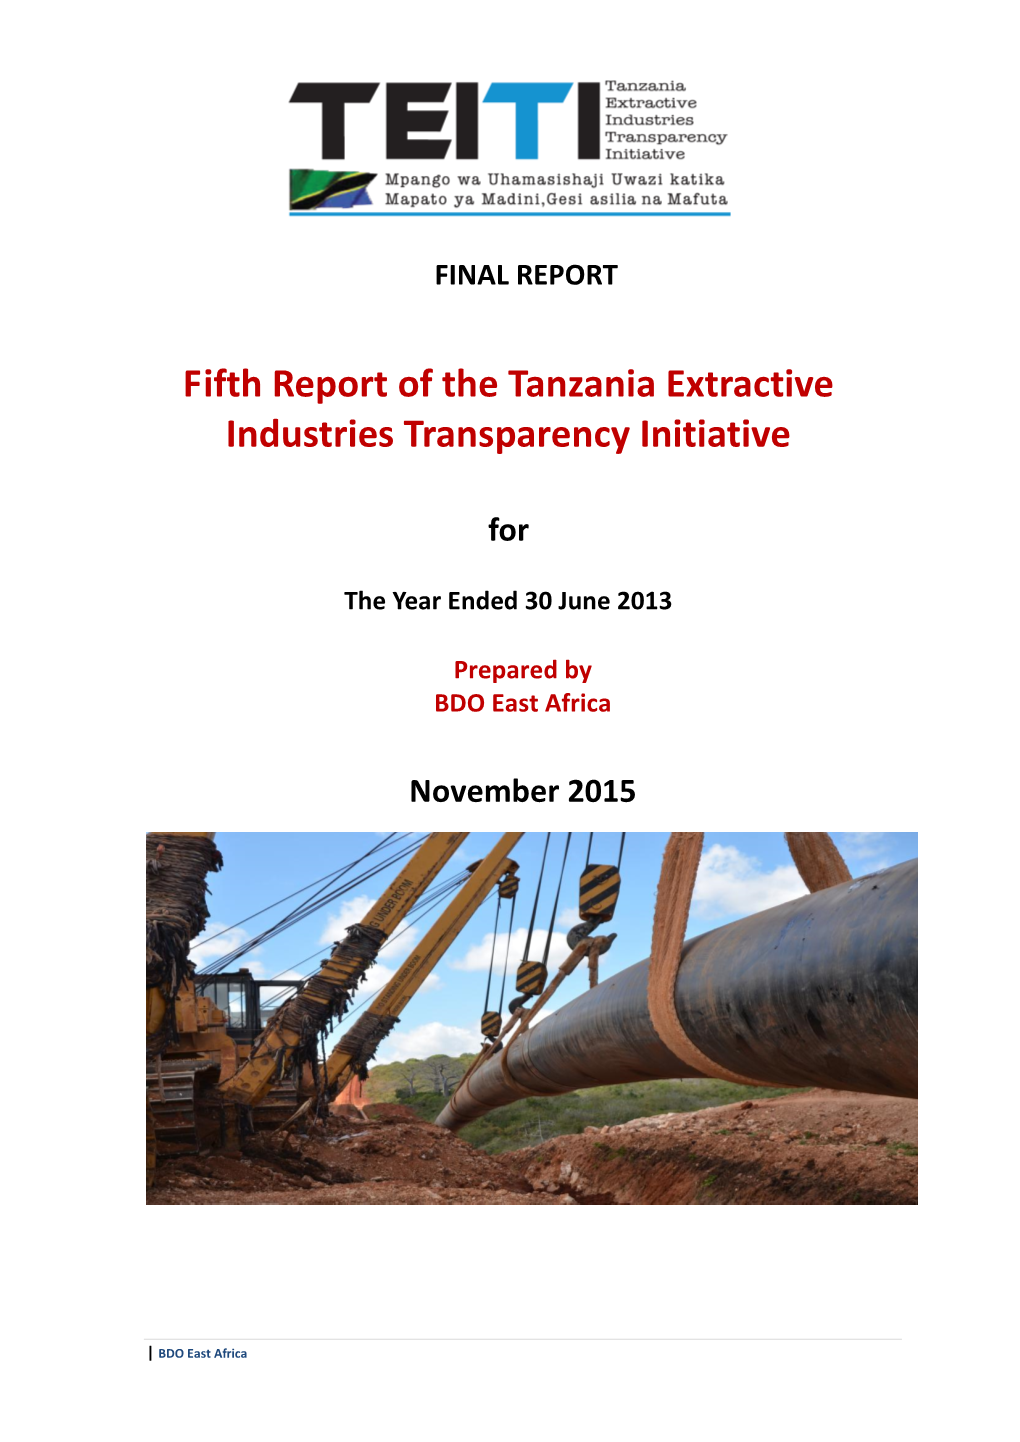 Fifth Report of the Tanzania Extractive Industries Transparency Initiative